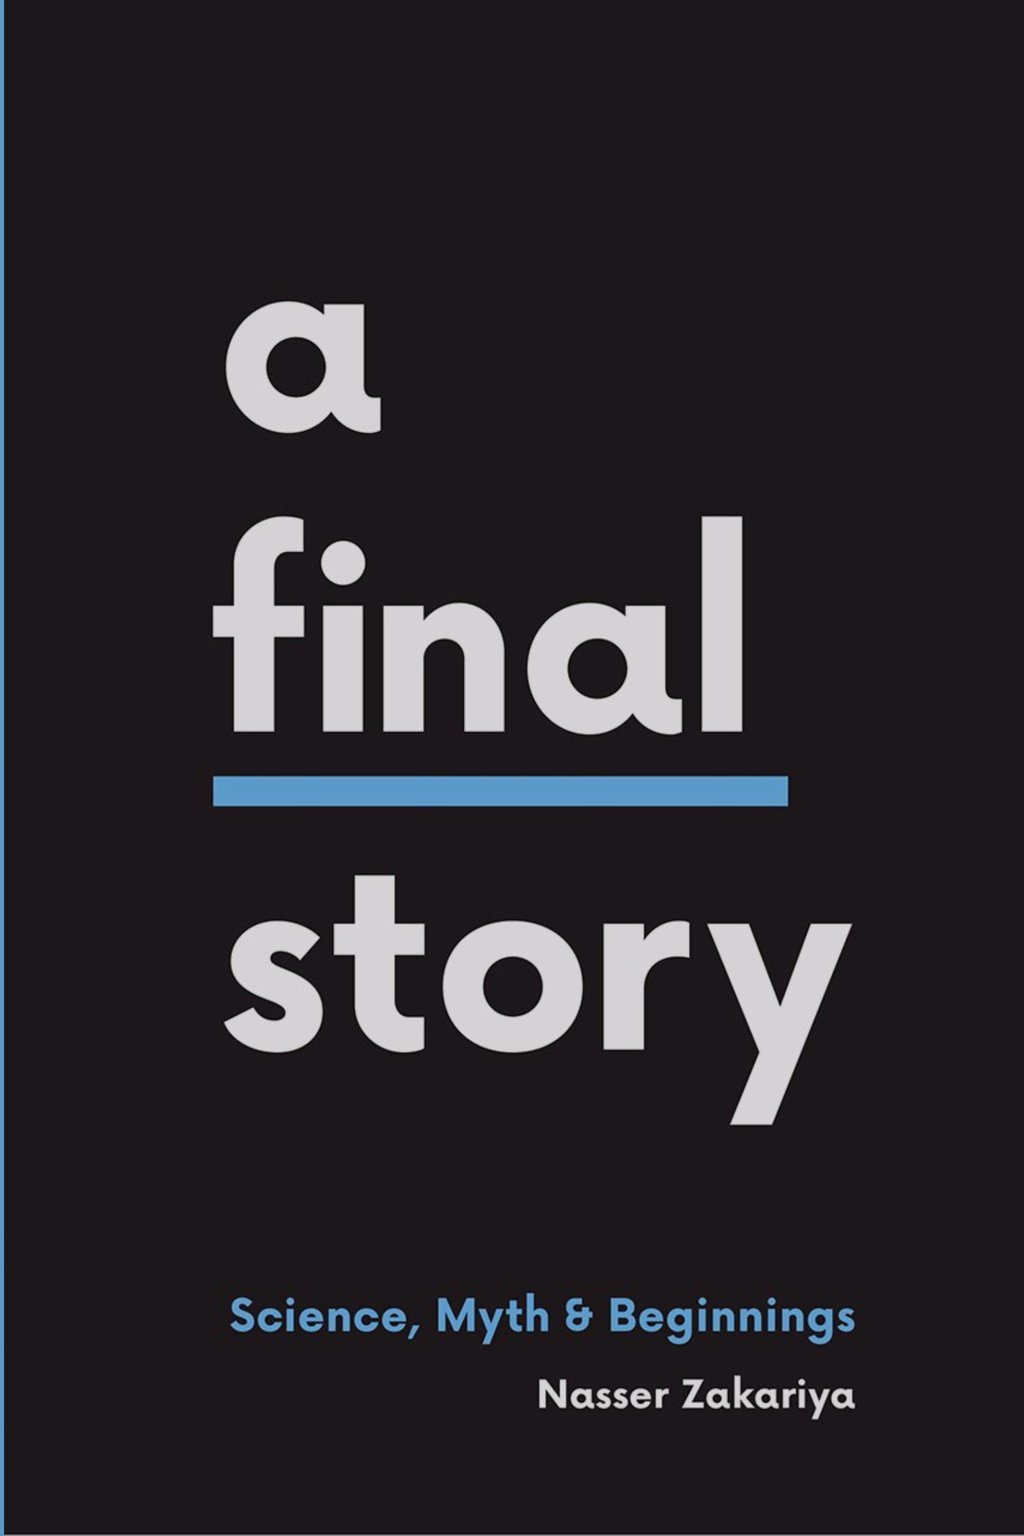 The Final Story